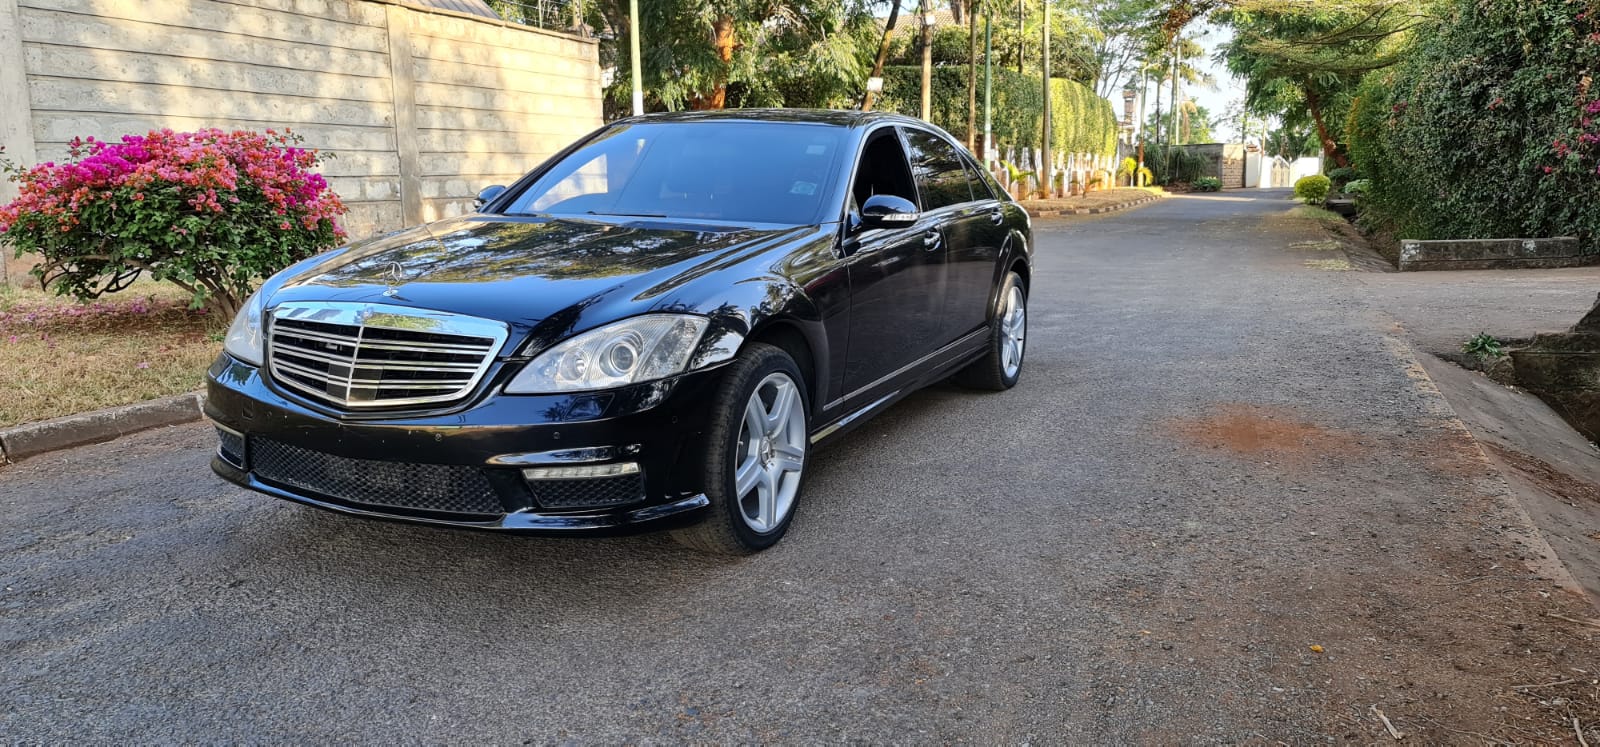 Mercedes Benz S320 SUNROOF Cheapest You Pay 30% DEPOSIT 70% installments Trade in OK